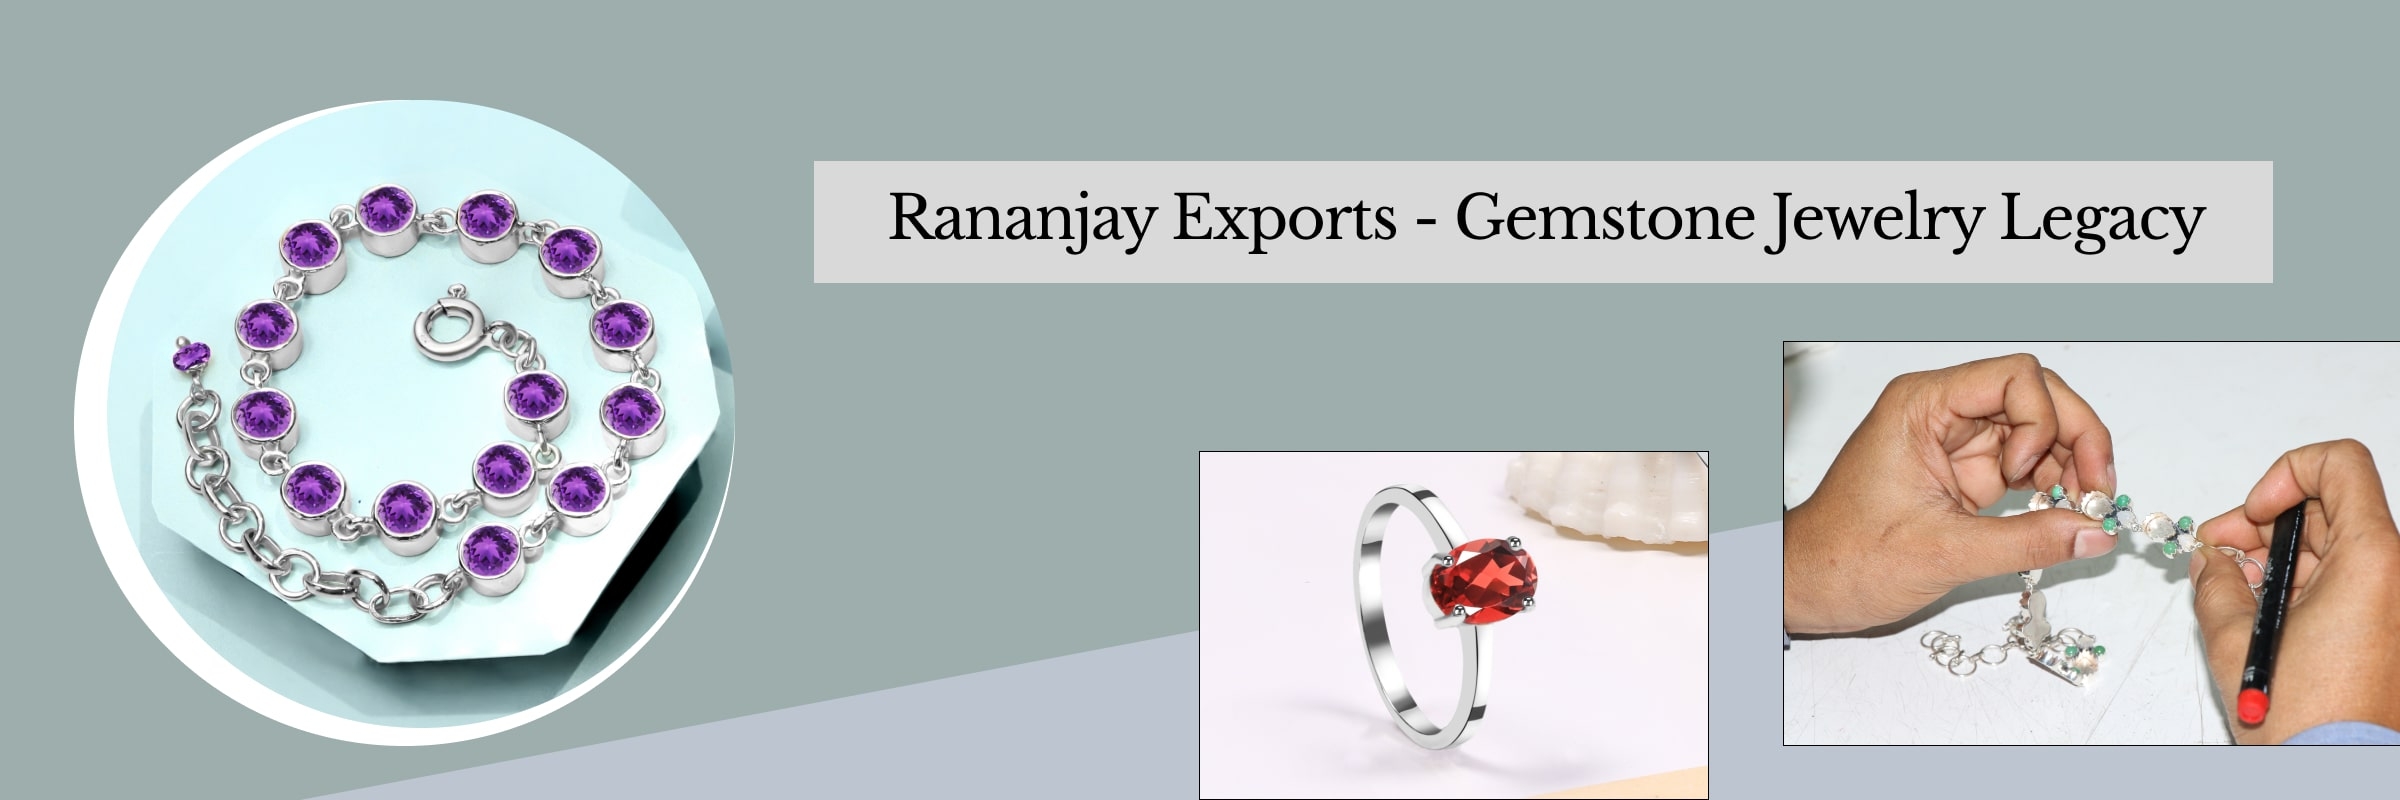 The History of Rananjay Exports in the field of Gemstone Jewelry Manufacturing